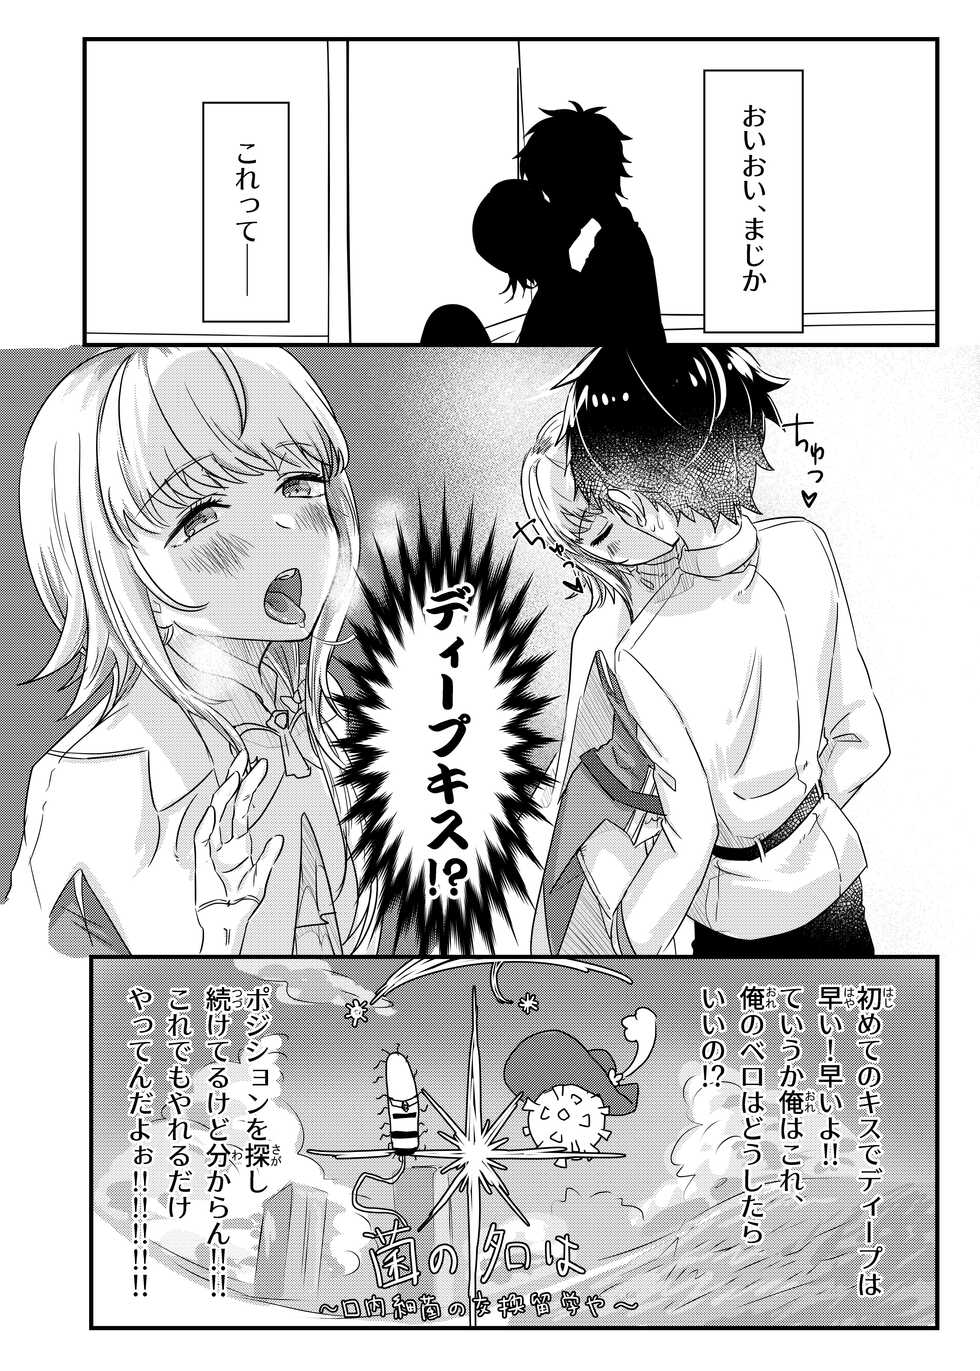 [Oniichan no Imouto (Oniichan no Imouto)] Anal, Anali, Analedomo (Fate/Grand Order) [Digital] - Page 9